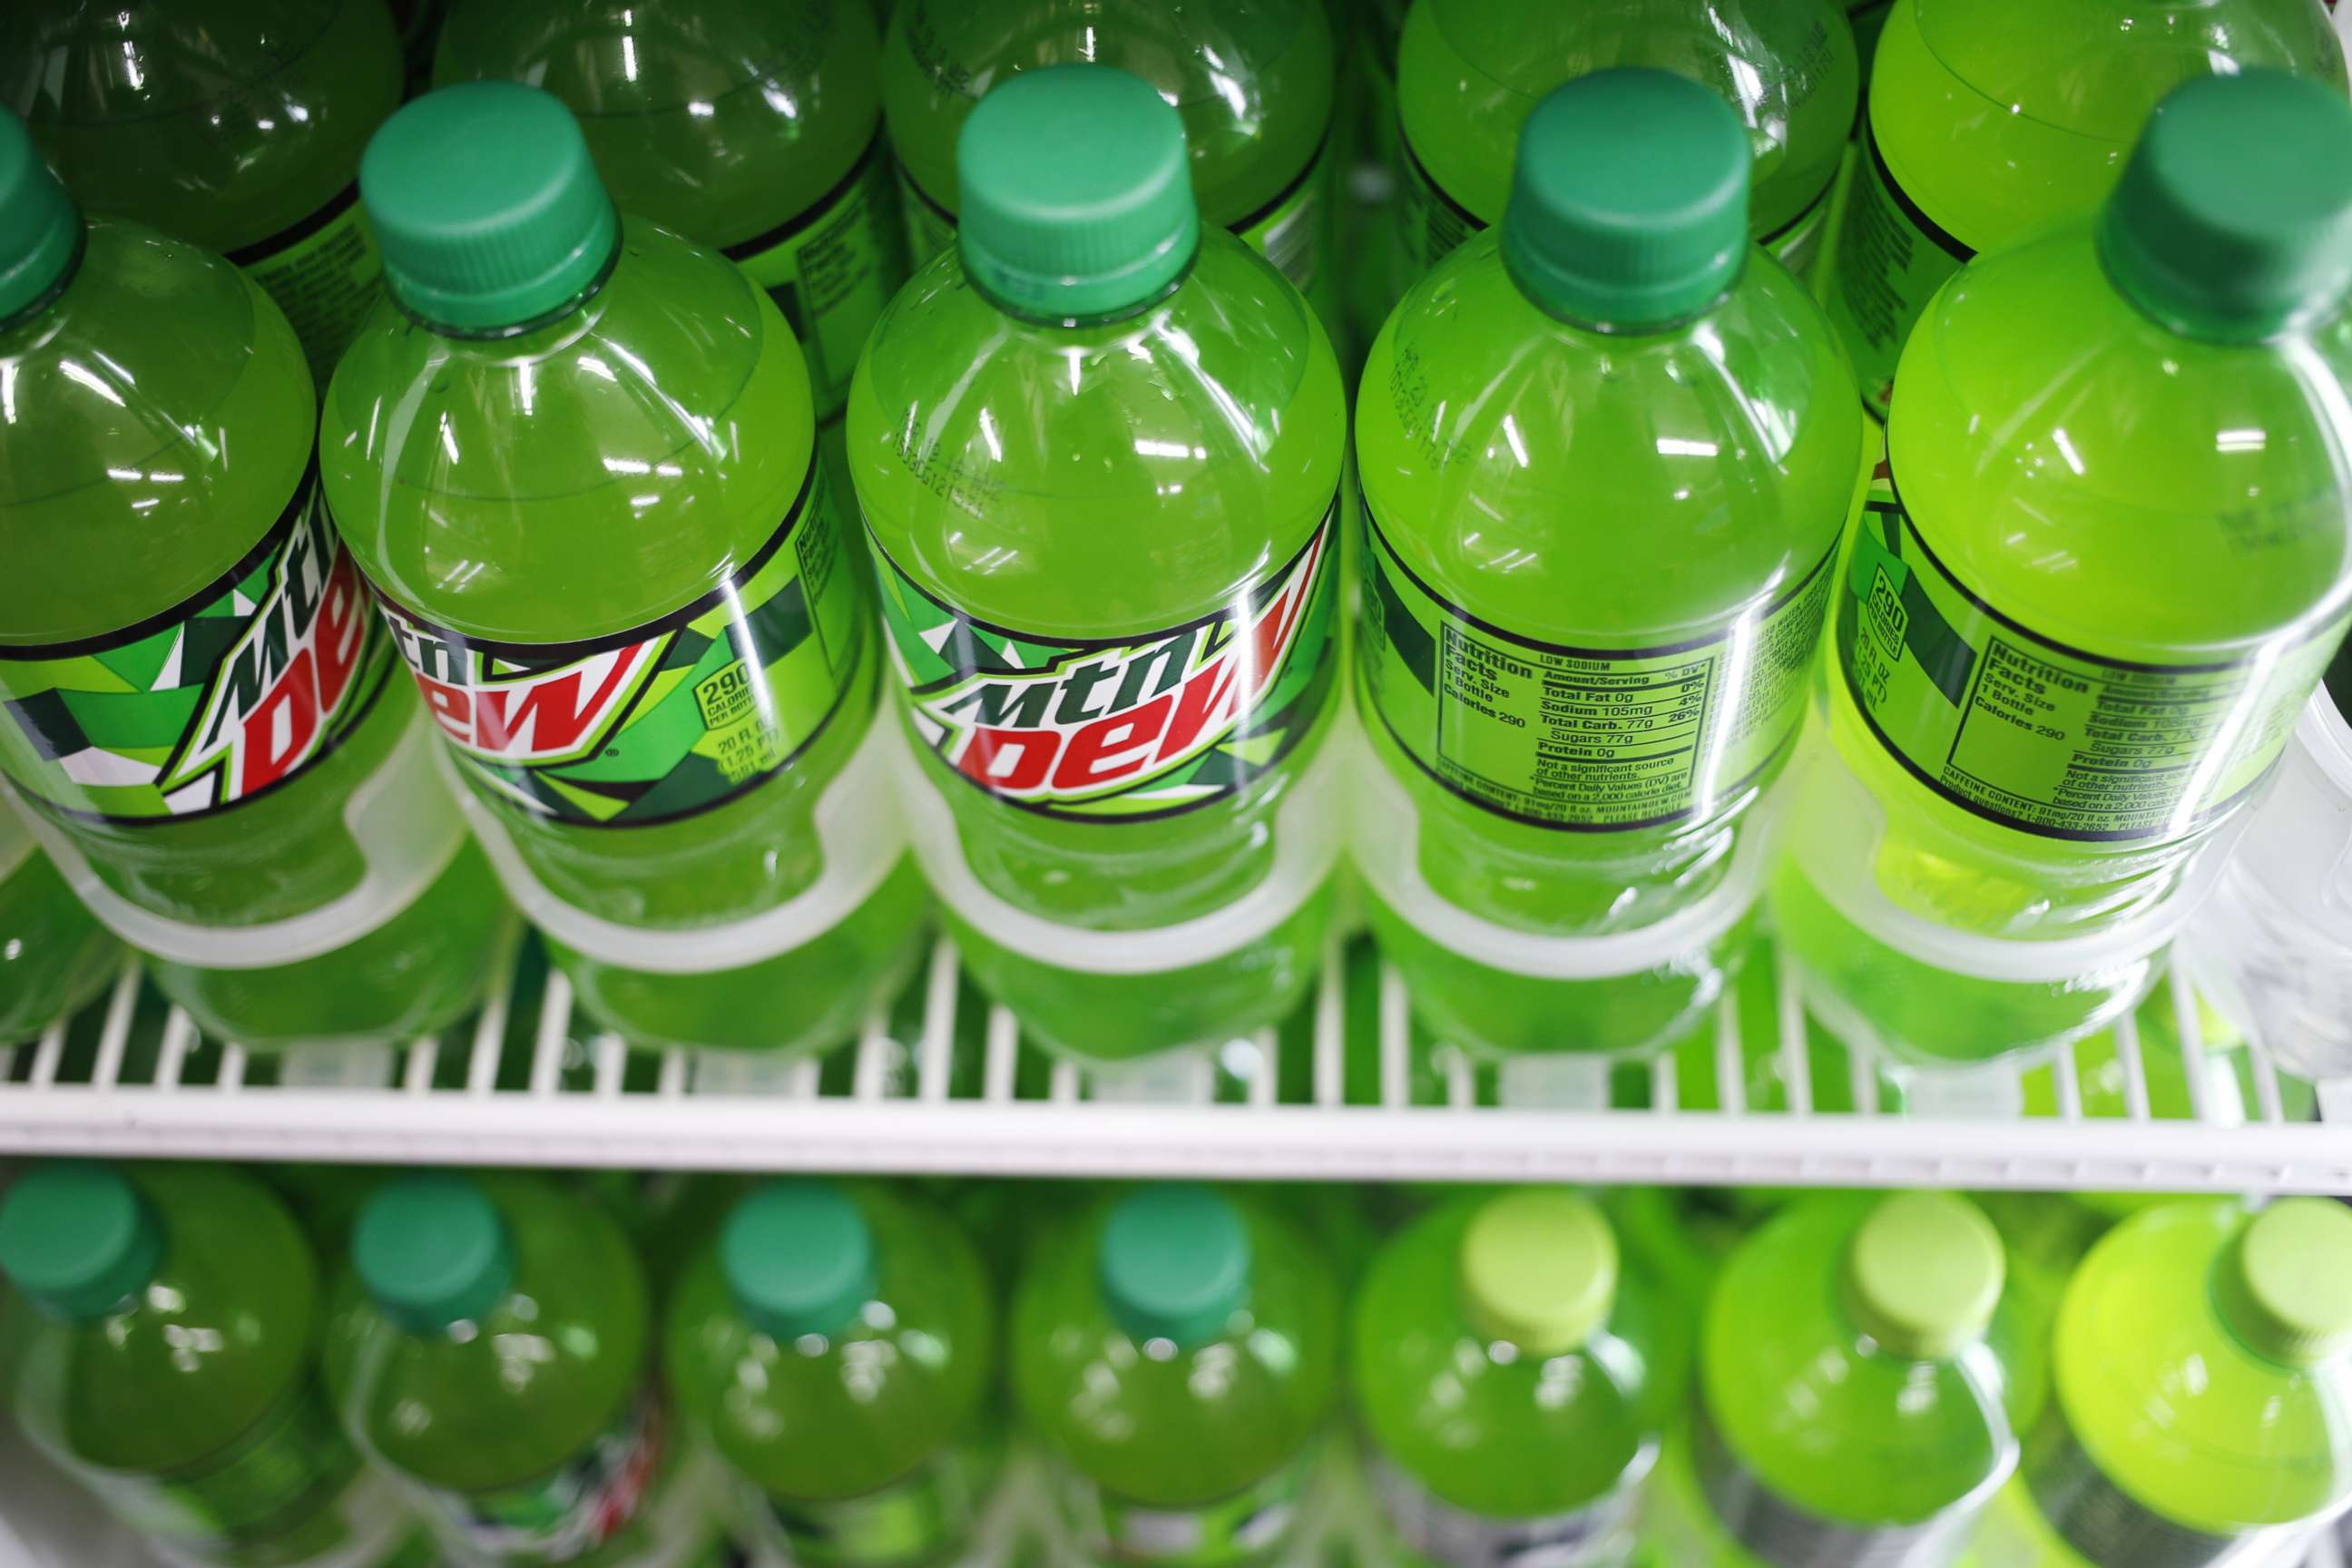 PHOTO: Bottles of PepsiCo Inc. Mountain Dew brand soda are displayed for sale inside a convenience store in Bagdad, Ky.,Feb. 11, 2018.